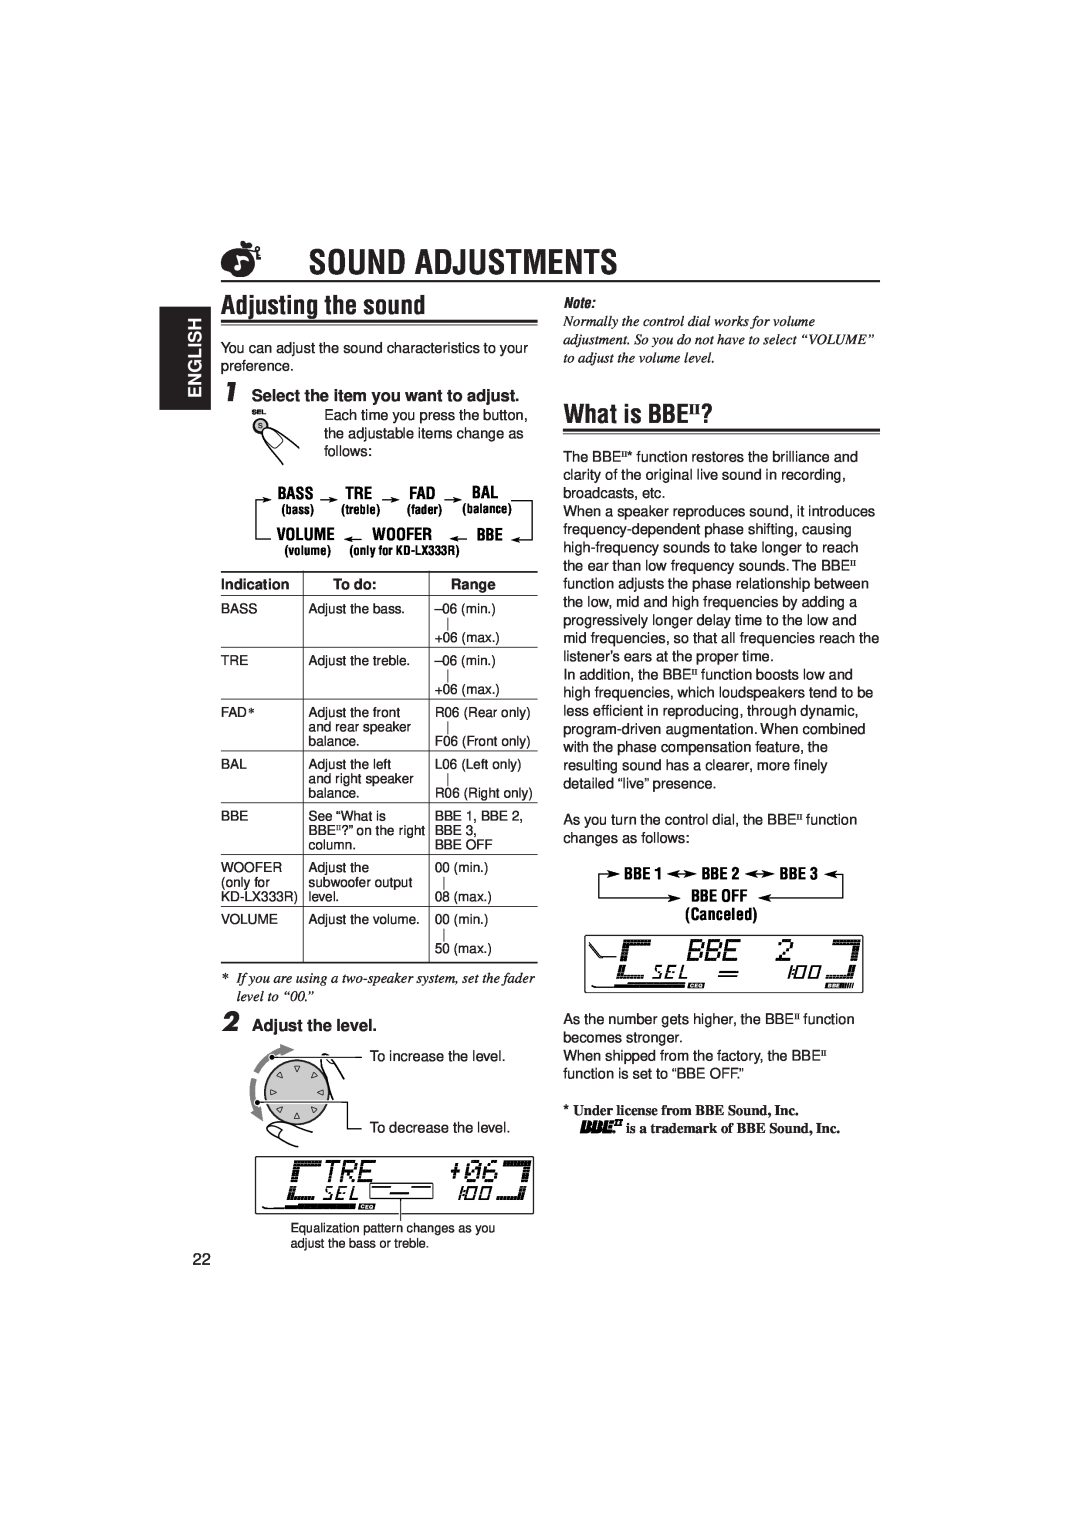 JVC PIM171200 Sound Adjustments, What is BBEII?, Adjusting the sound, English, Select the item you want to adjust, To do 